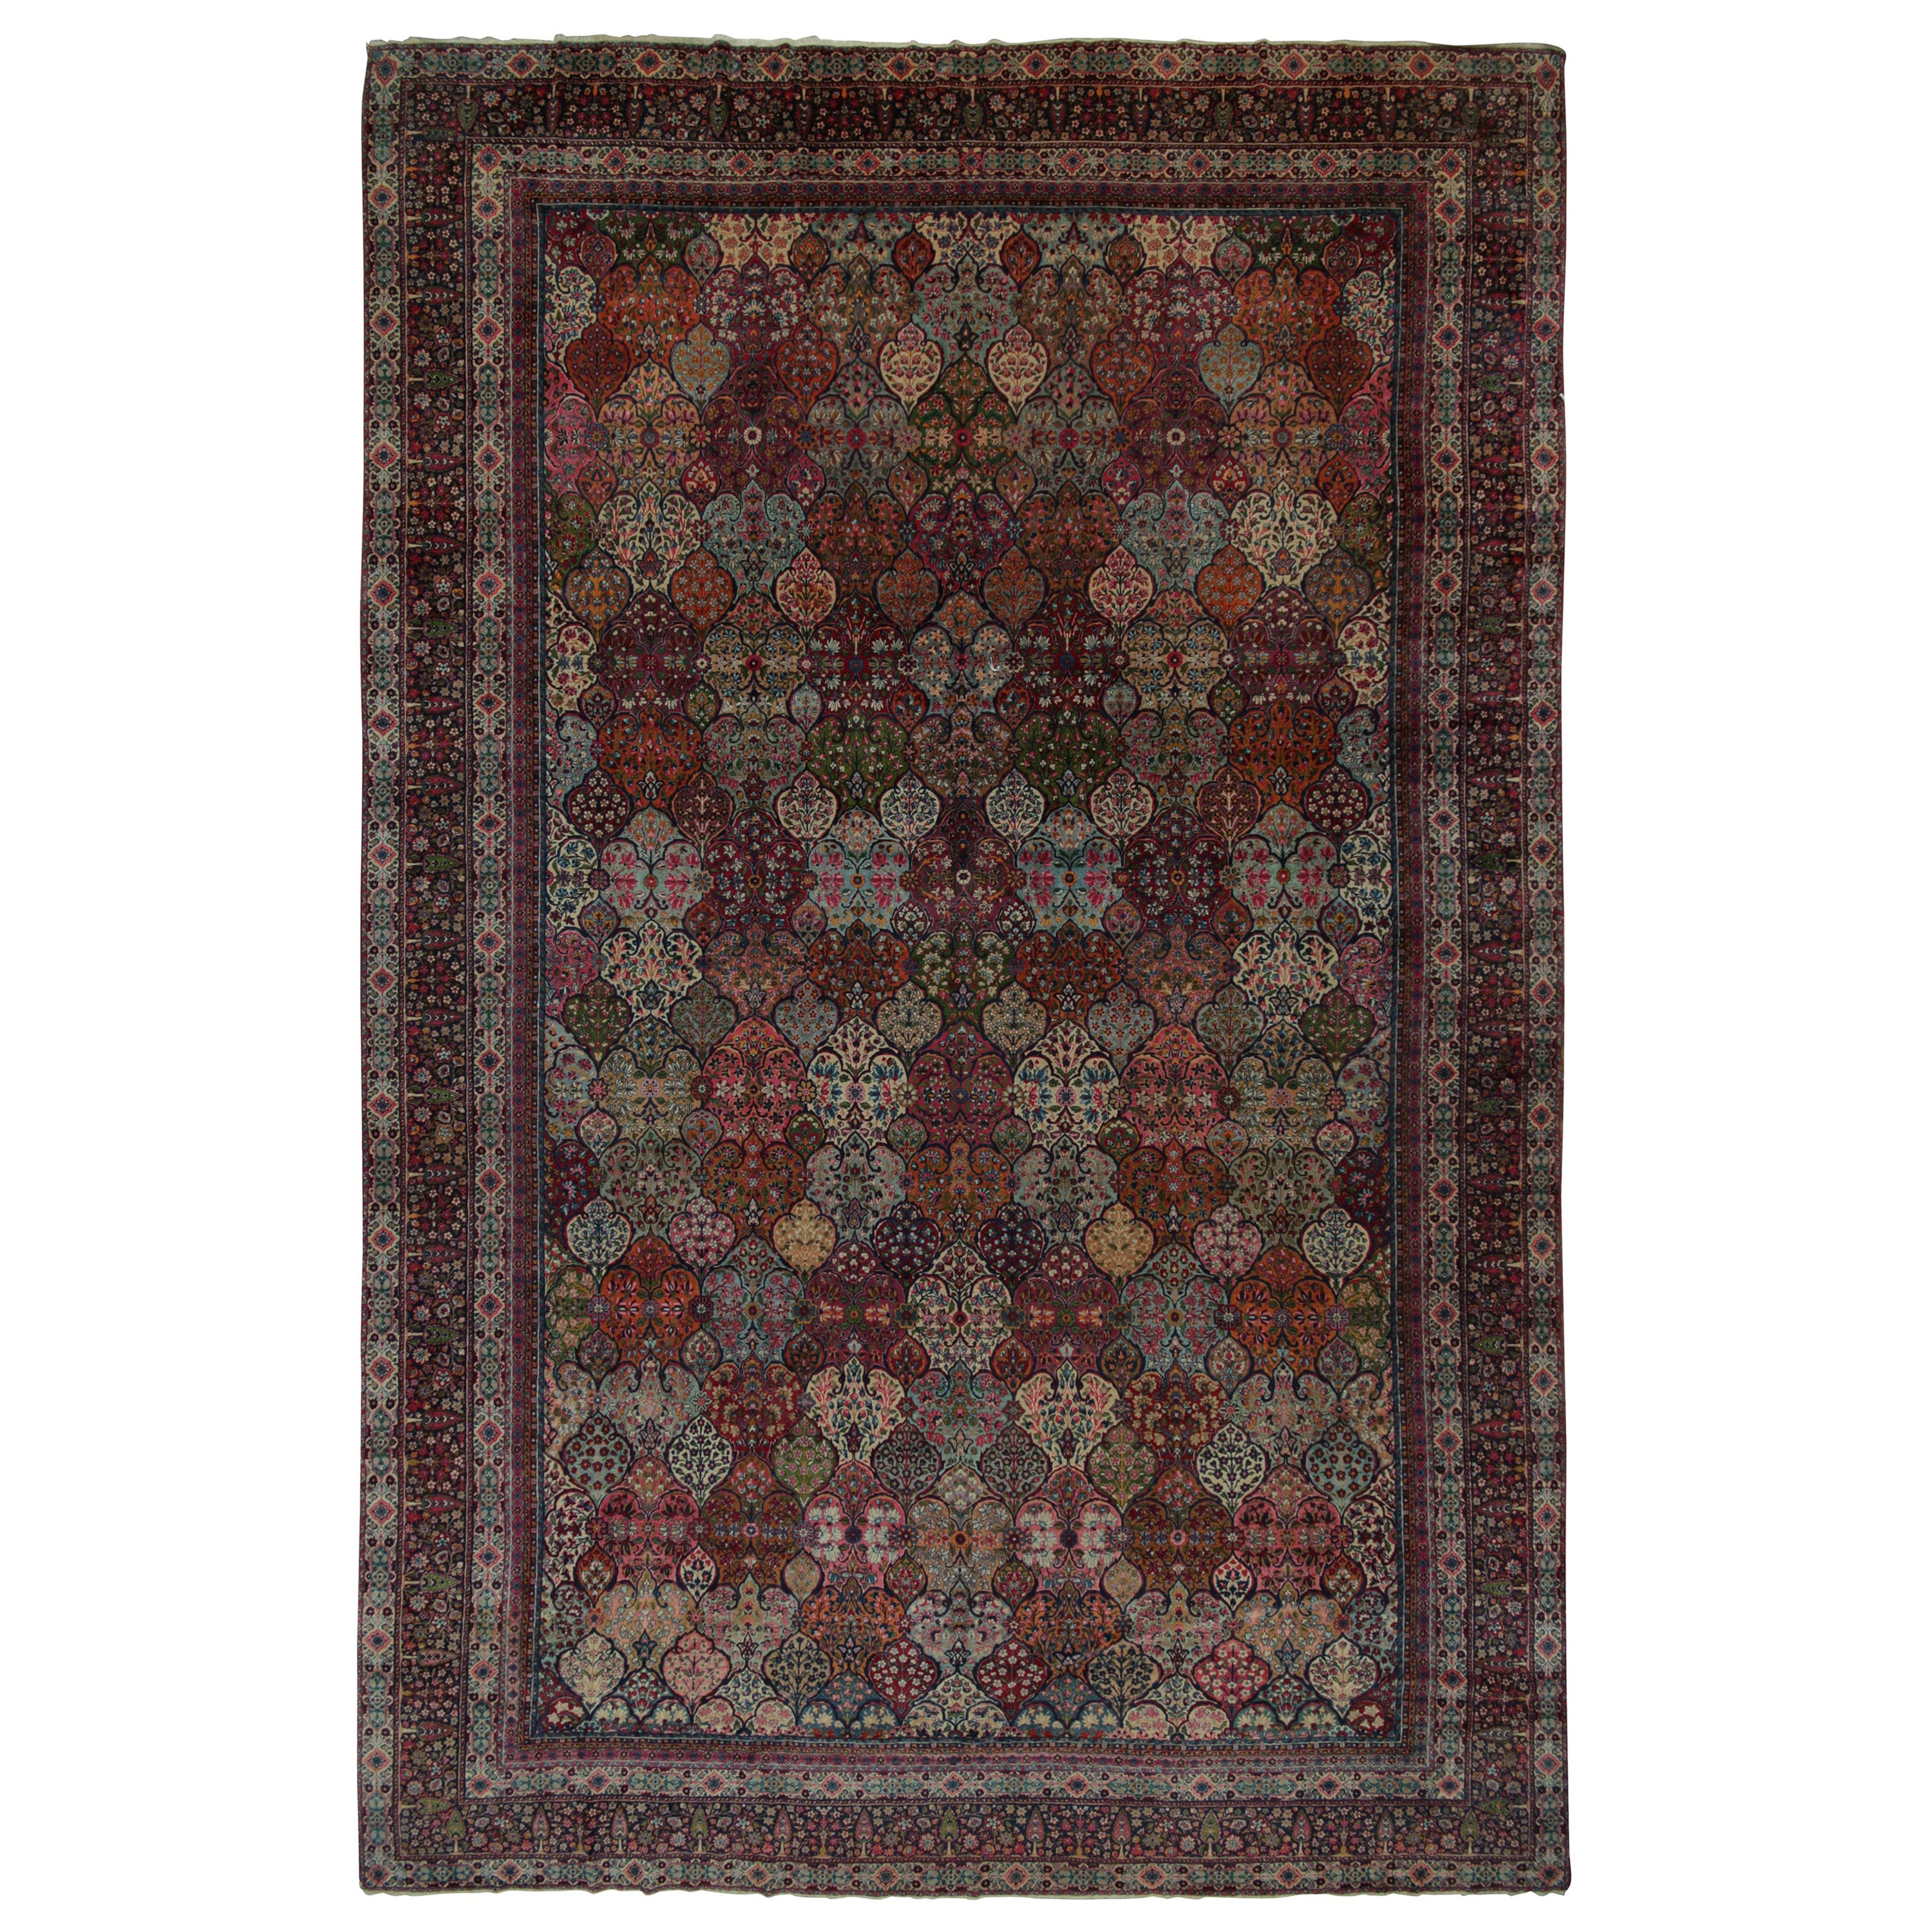 Rare Antique Persian Kerman Rug in Polychromatic Floral Pattern - by Rug & Kilim For Sale